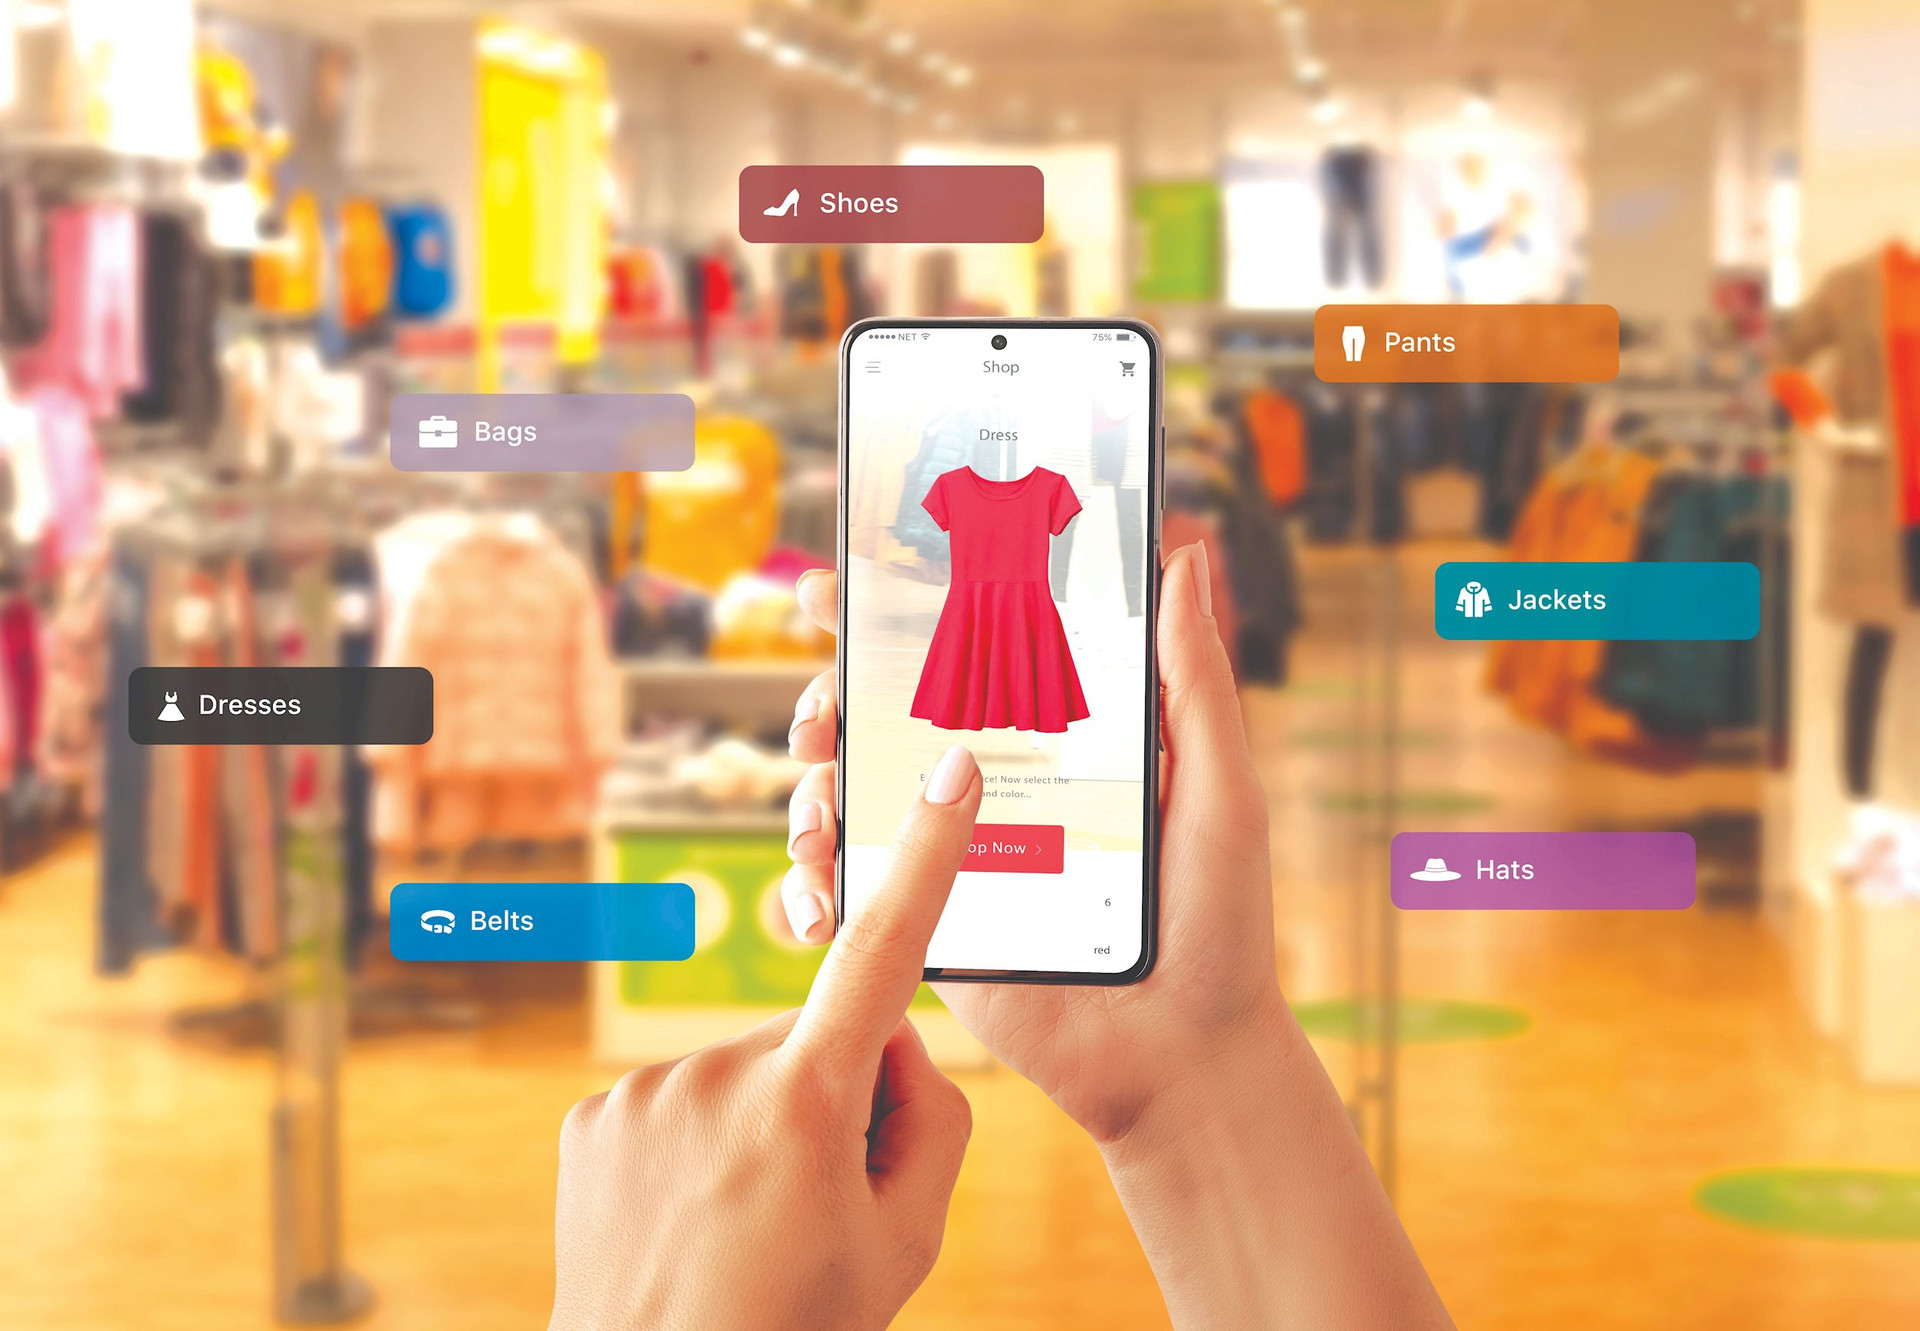 buying-clothes-with-virtual-reality-app-smart-phone-choosing-color-size-dress-compressed.jpeg